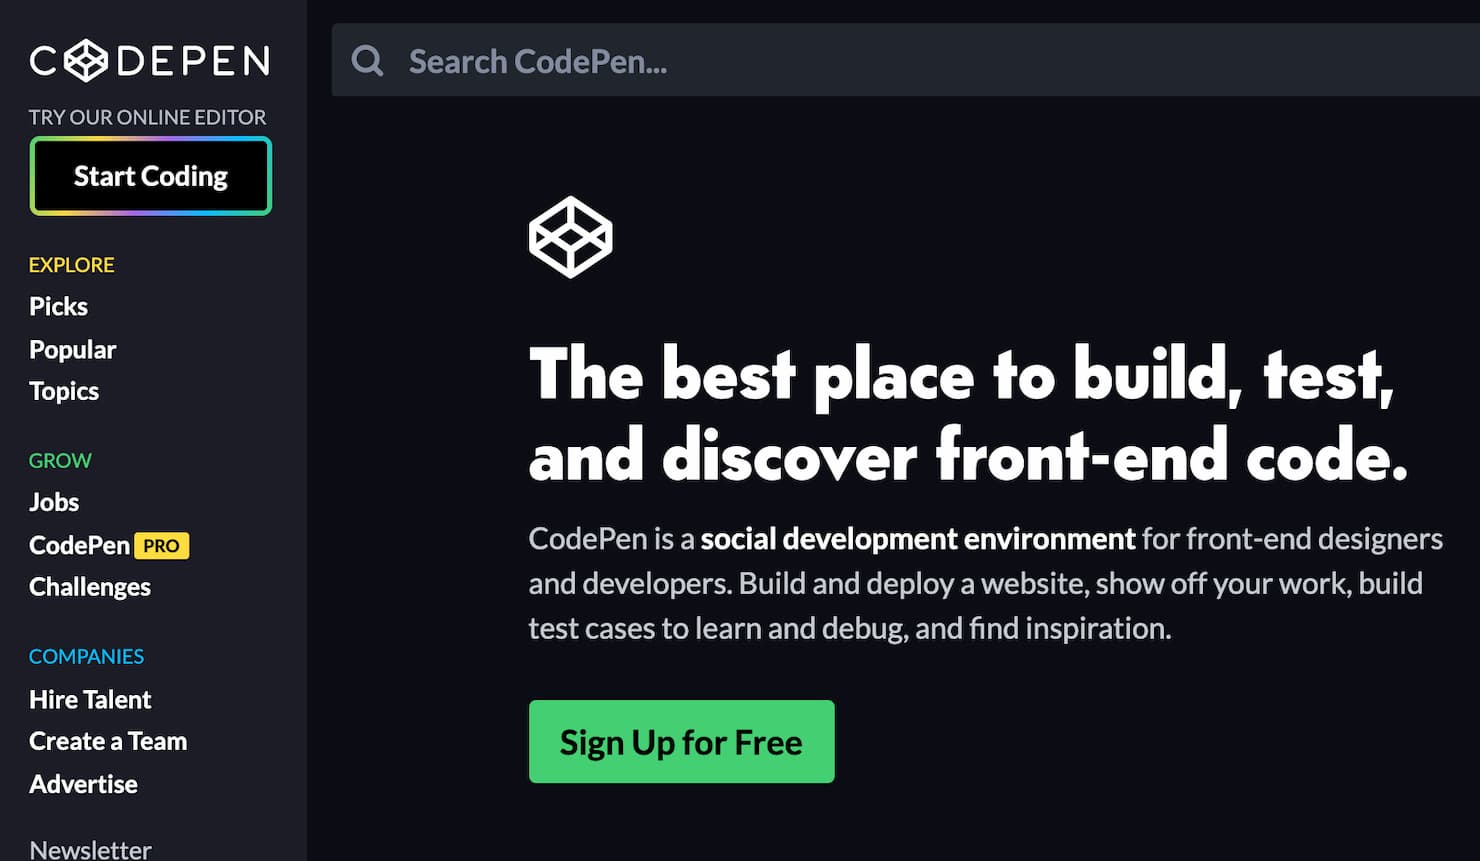 Codepen’s “Start Coding” button is a good example of “lazy registration”